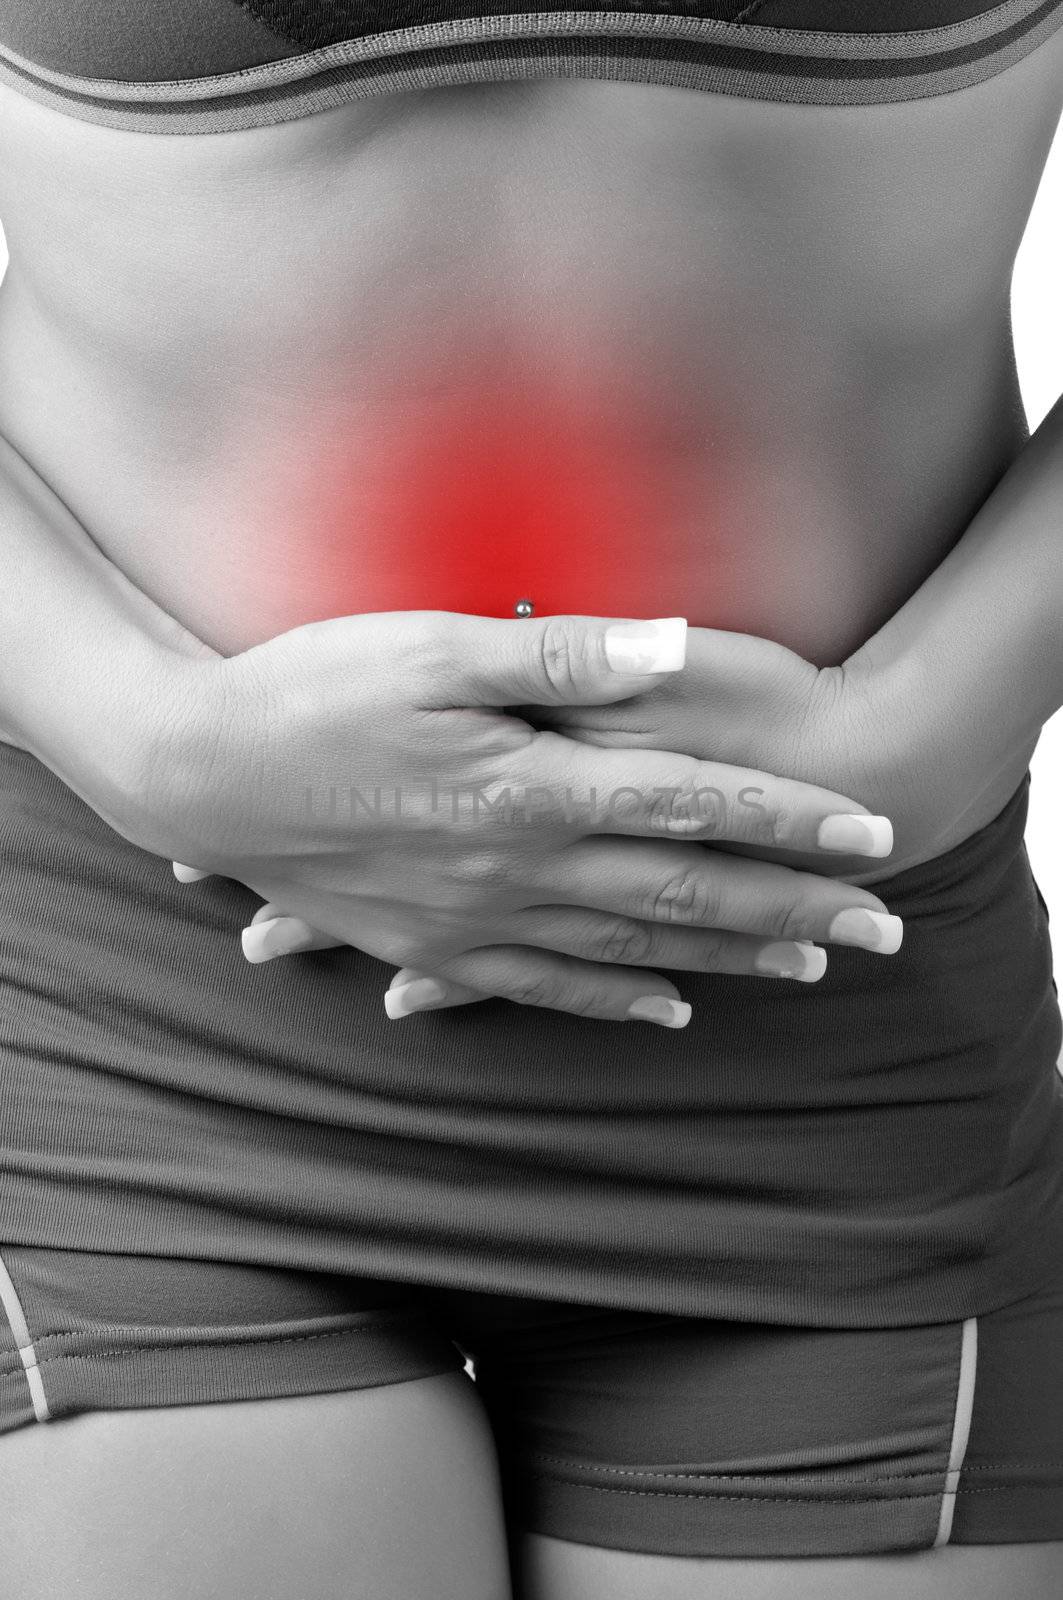 Woman suffering from stomach pain, isolated in white. Black and white with a red circle around the painful area.